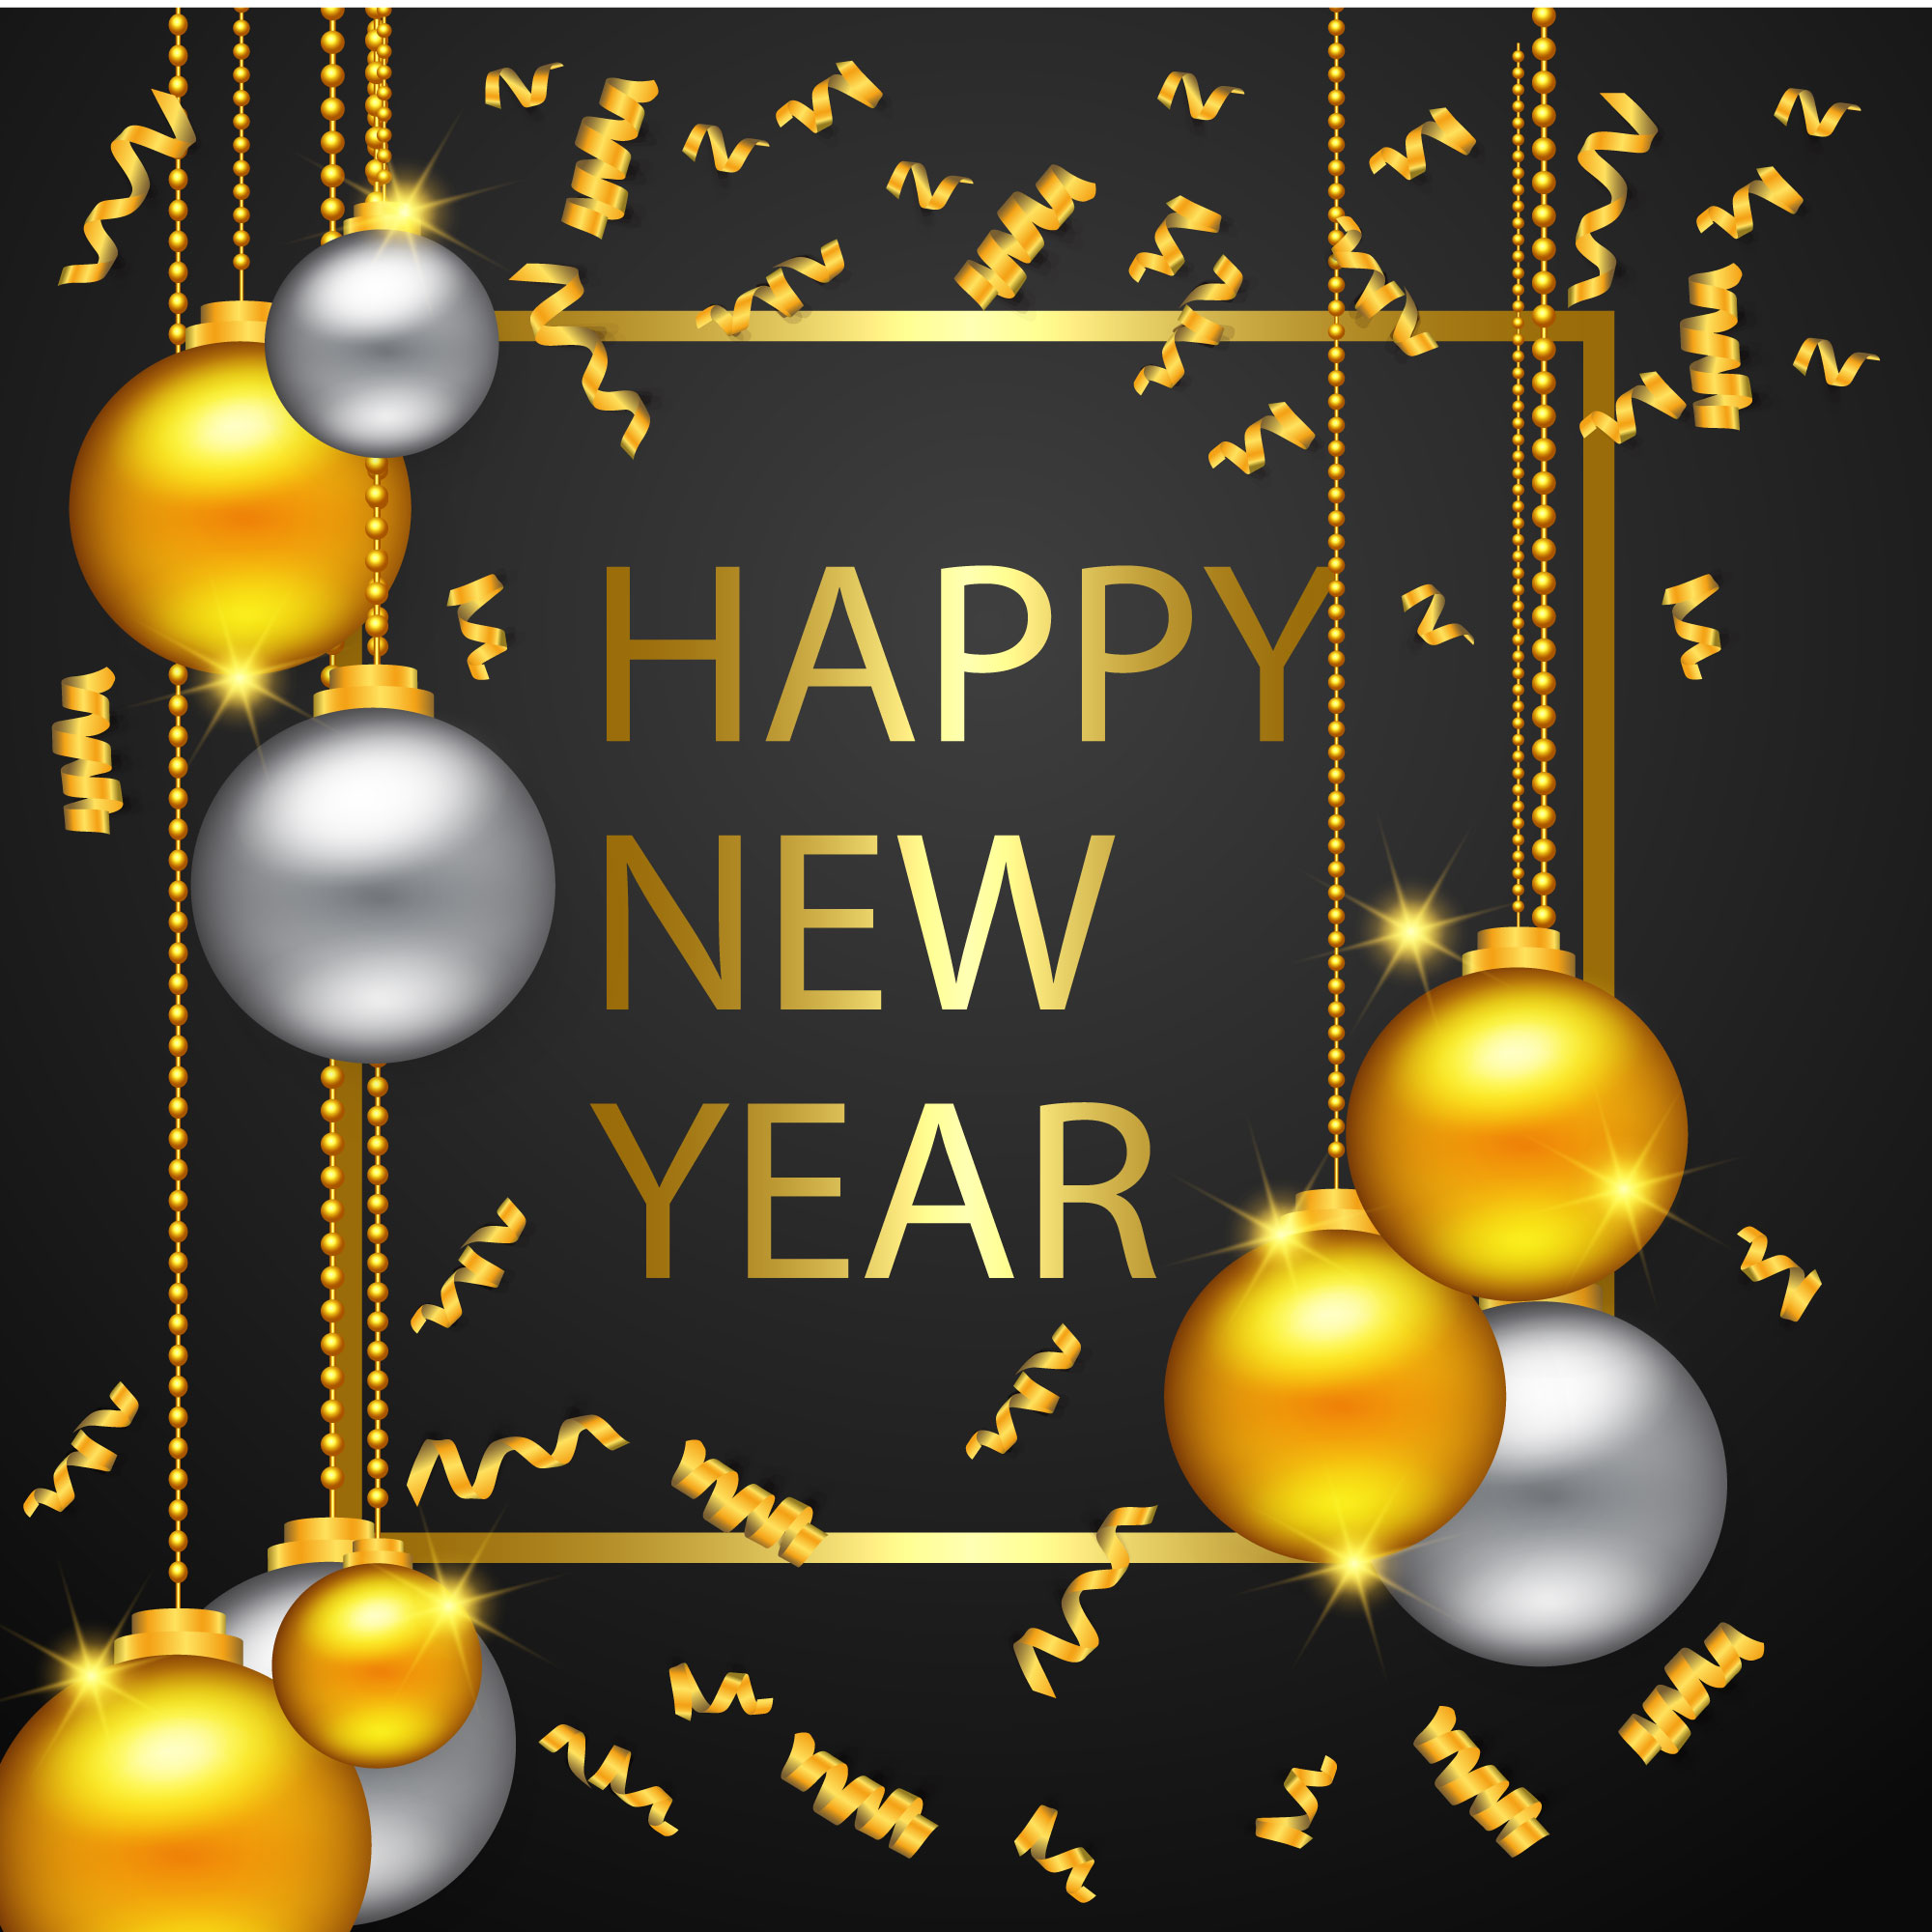 Happy New Year Gold And Black Colors - Download Free ...